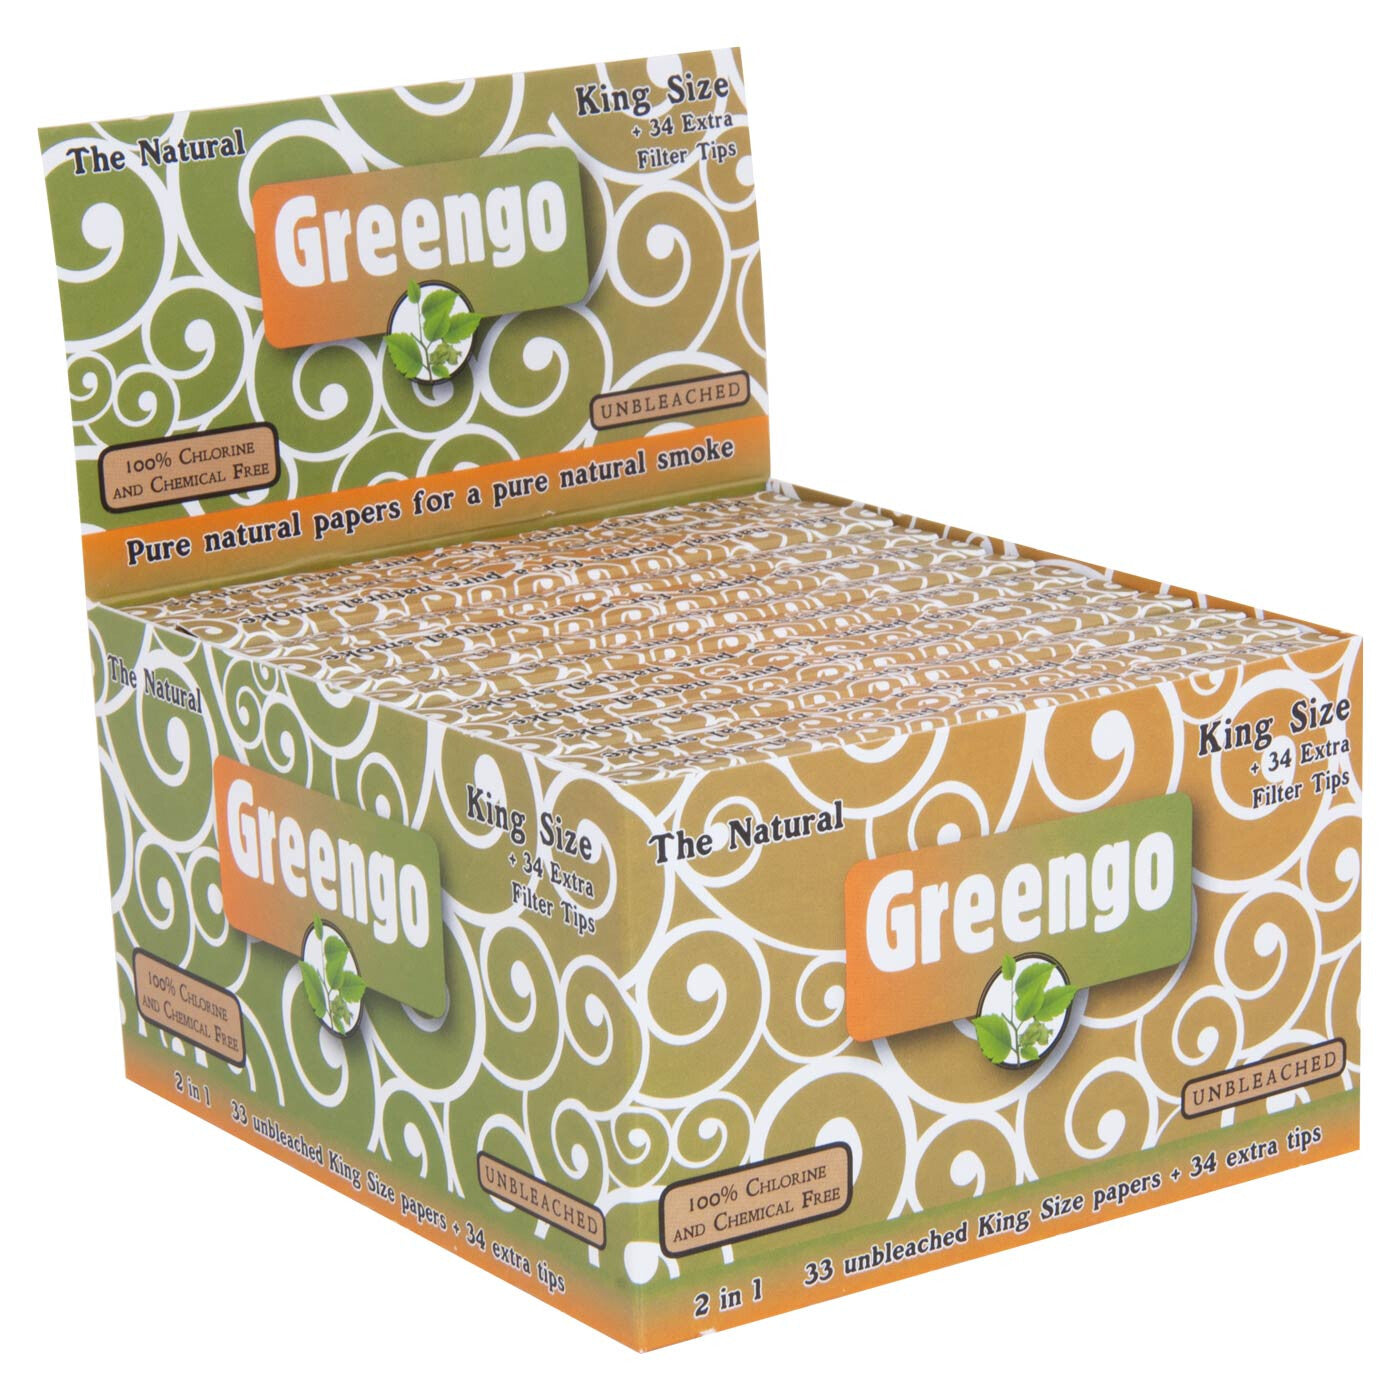 Display Greengo Unbleached King Size Regular 2 In 1 24 Pcs